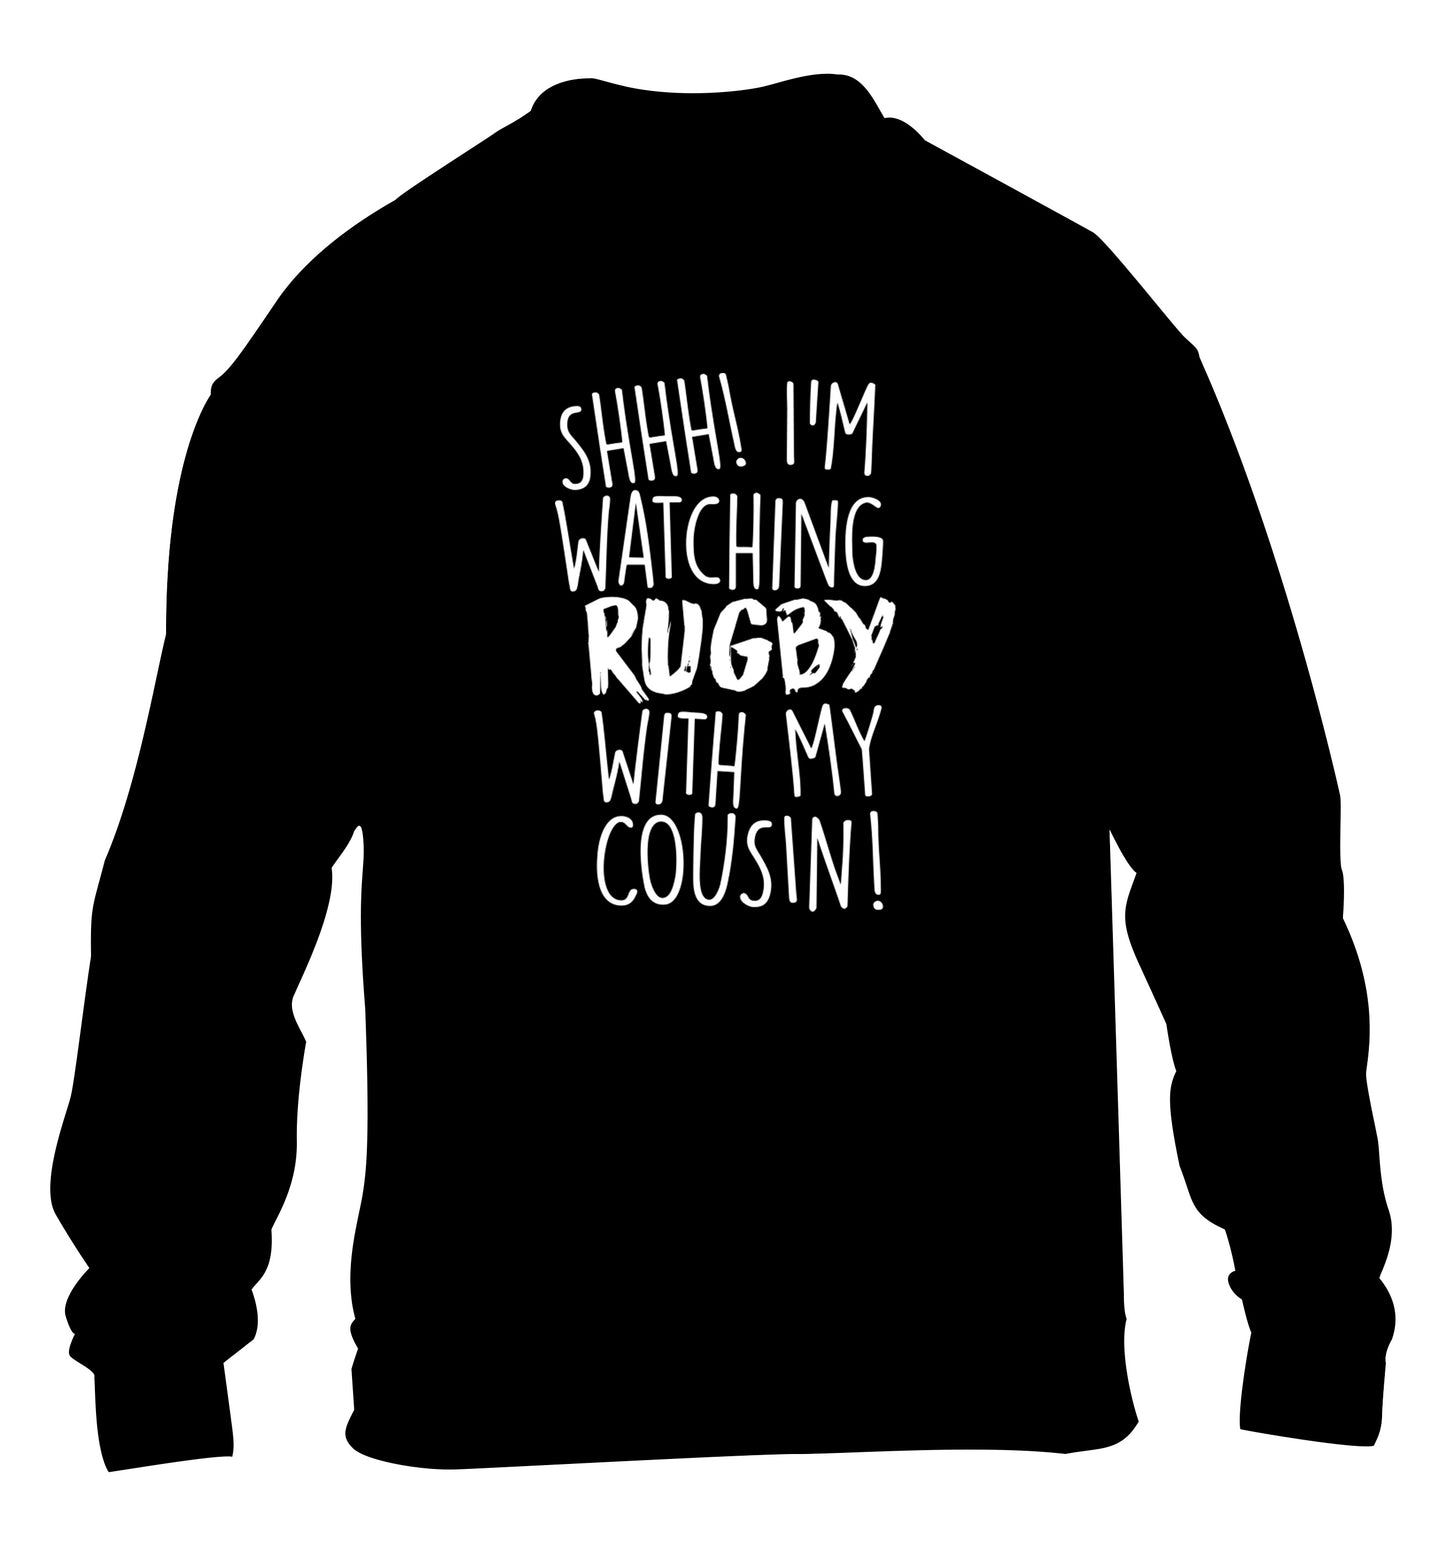 Shhh I'm watching rugby with my cousin children's black sweater 12-13 Years